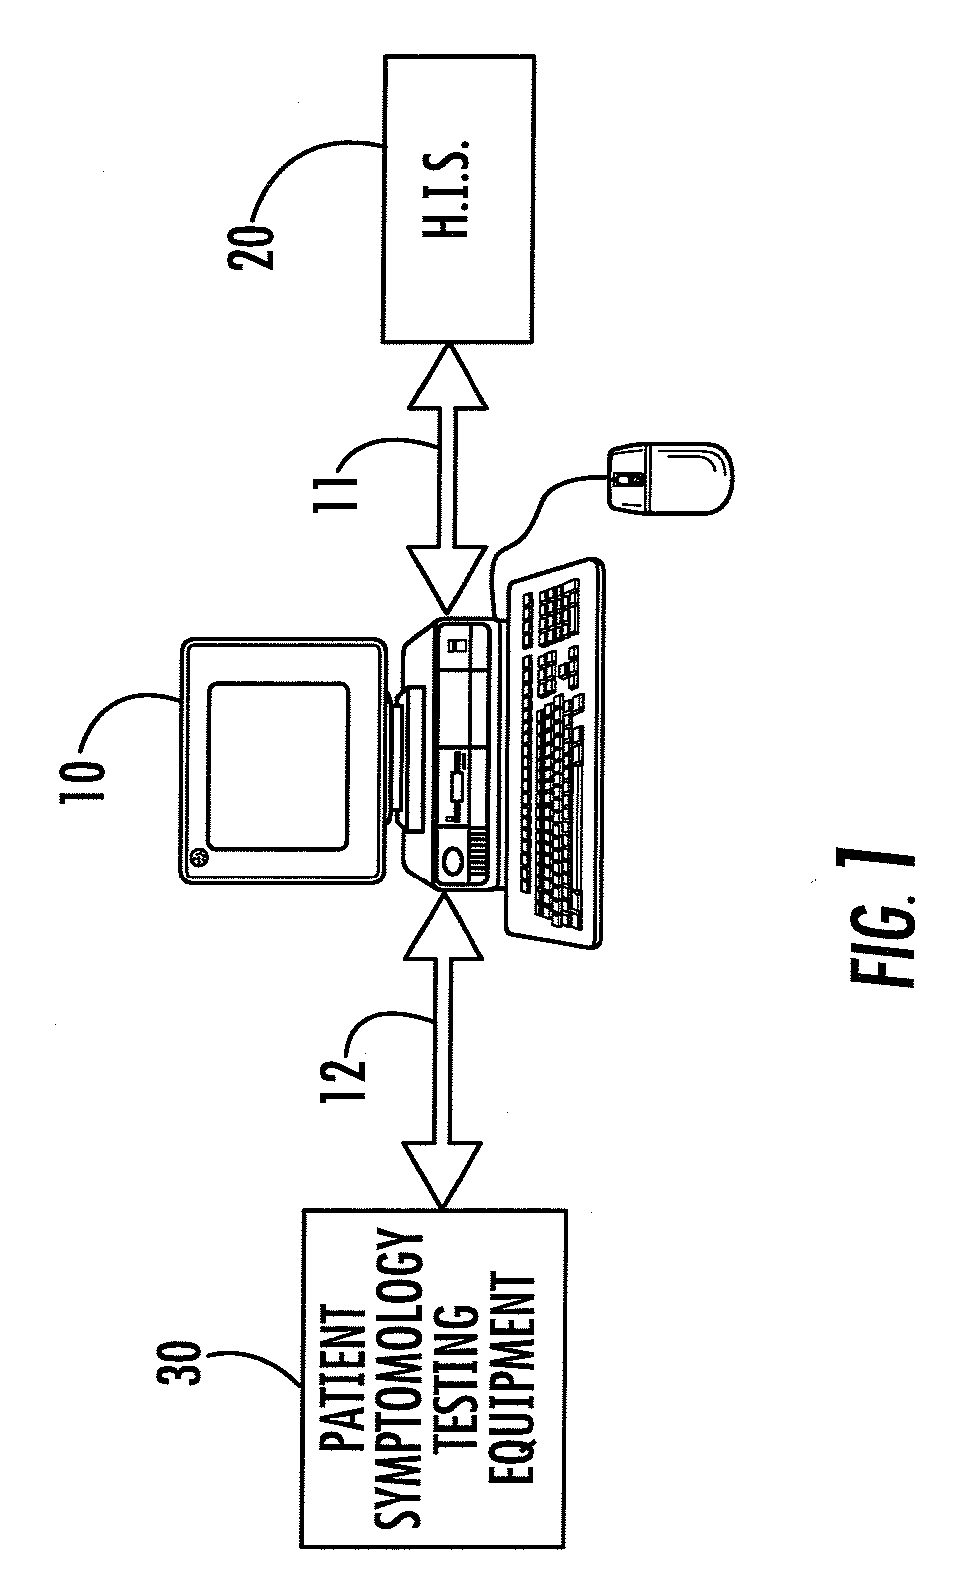 Automated system for capturing and archiving information to verify medical necessity of performing medical procedure